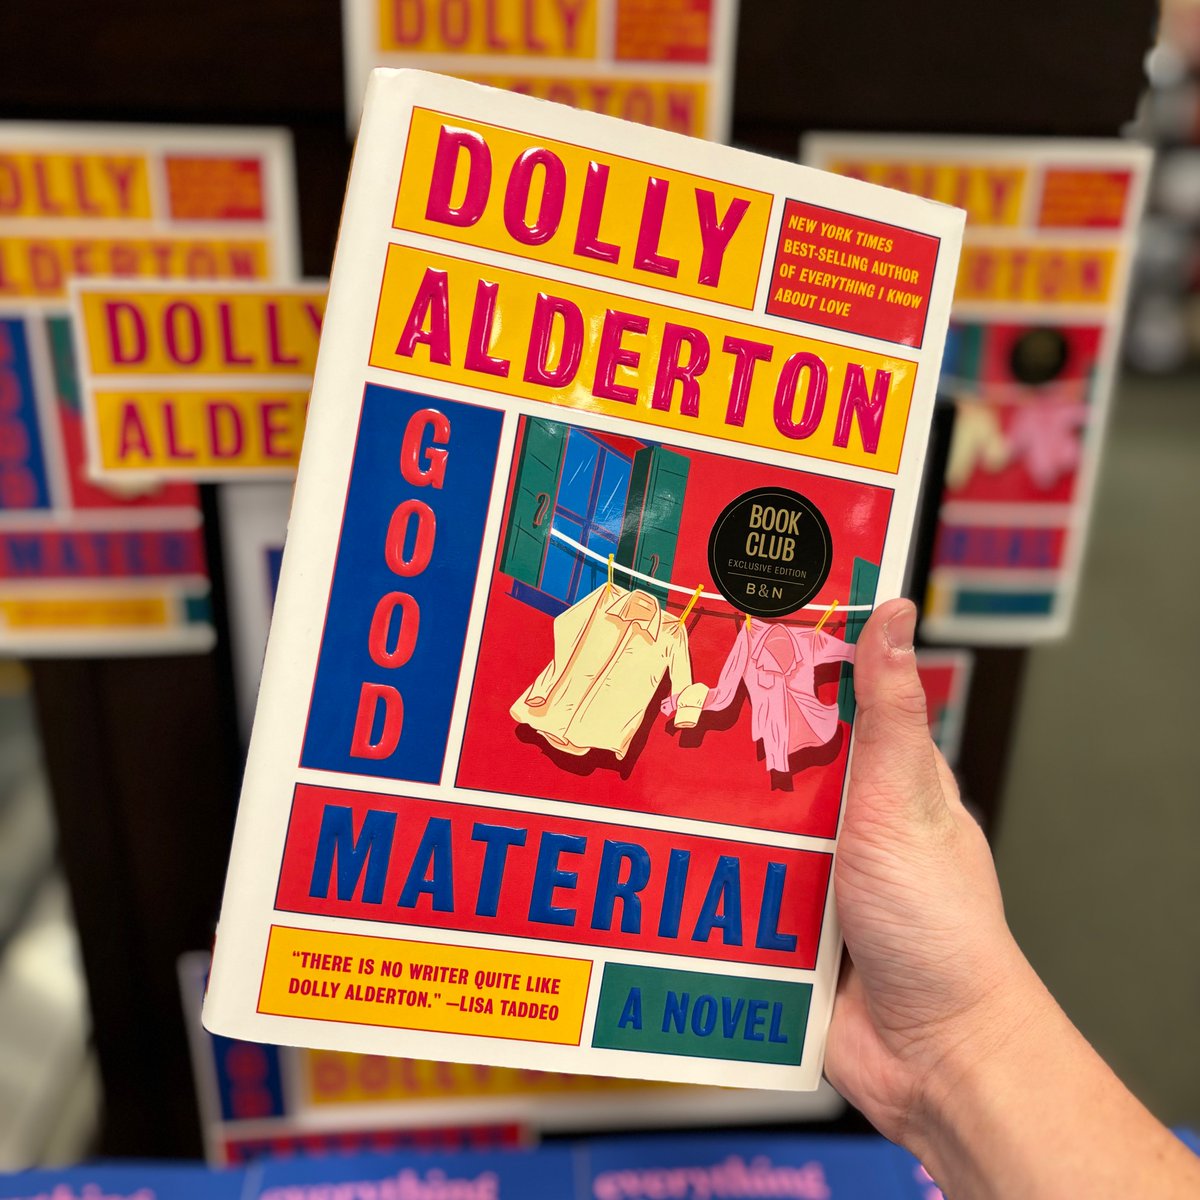 Andy loves Jen. Jen loved Andy. Where did it all go wrong? #GoodMaterial by #DollyAlderton is February's #BNBookClub pick. 🩷👕

#bnmidwest #bnbuzz #everythingiknowaboutlove #bookclub #newfiction #thisreallyisgoodmaterial